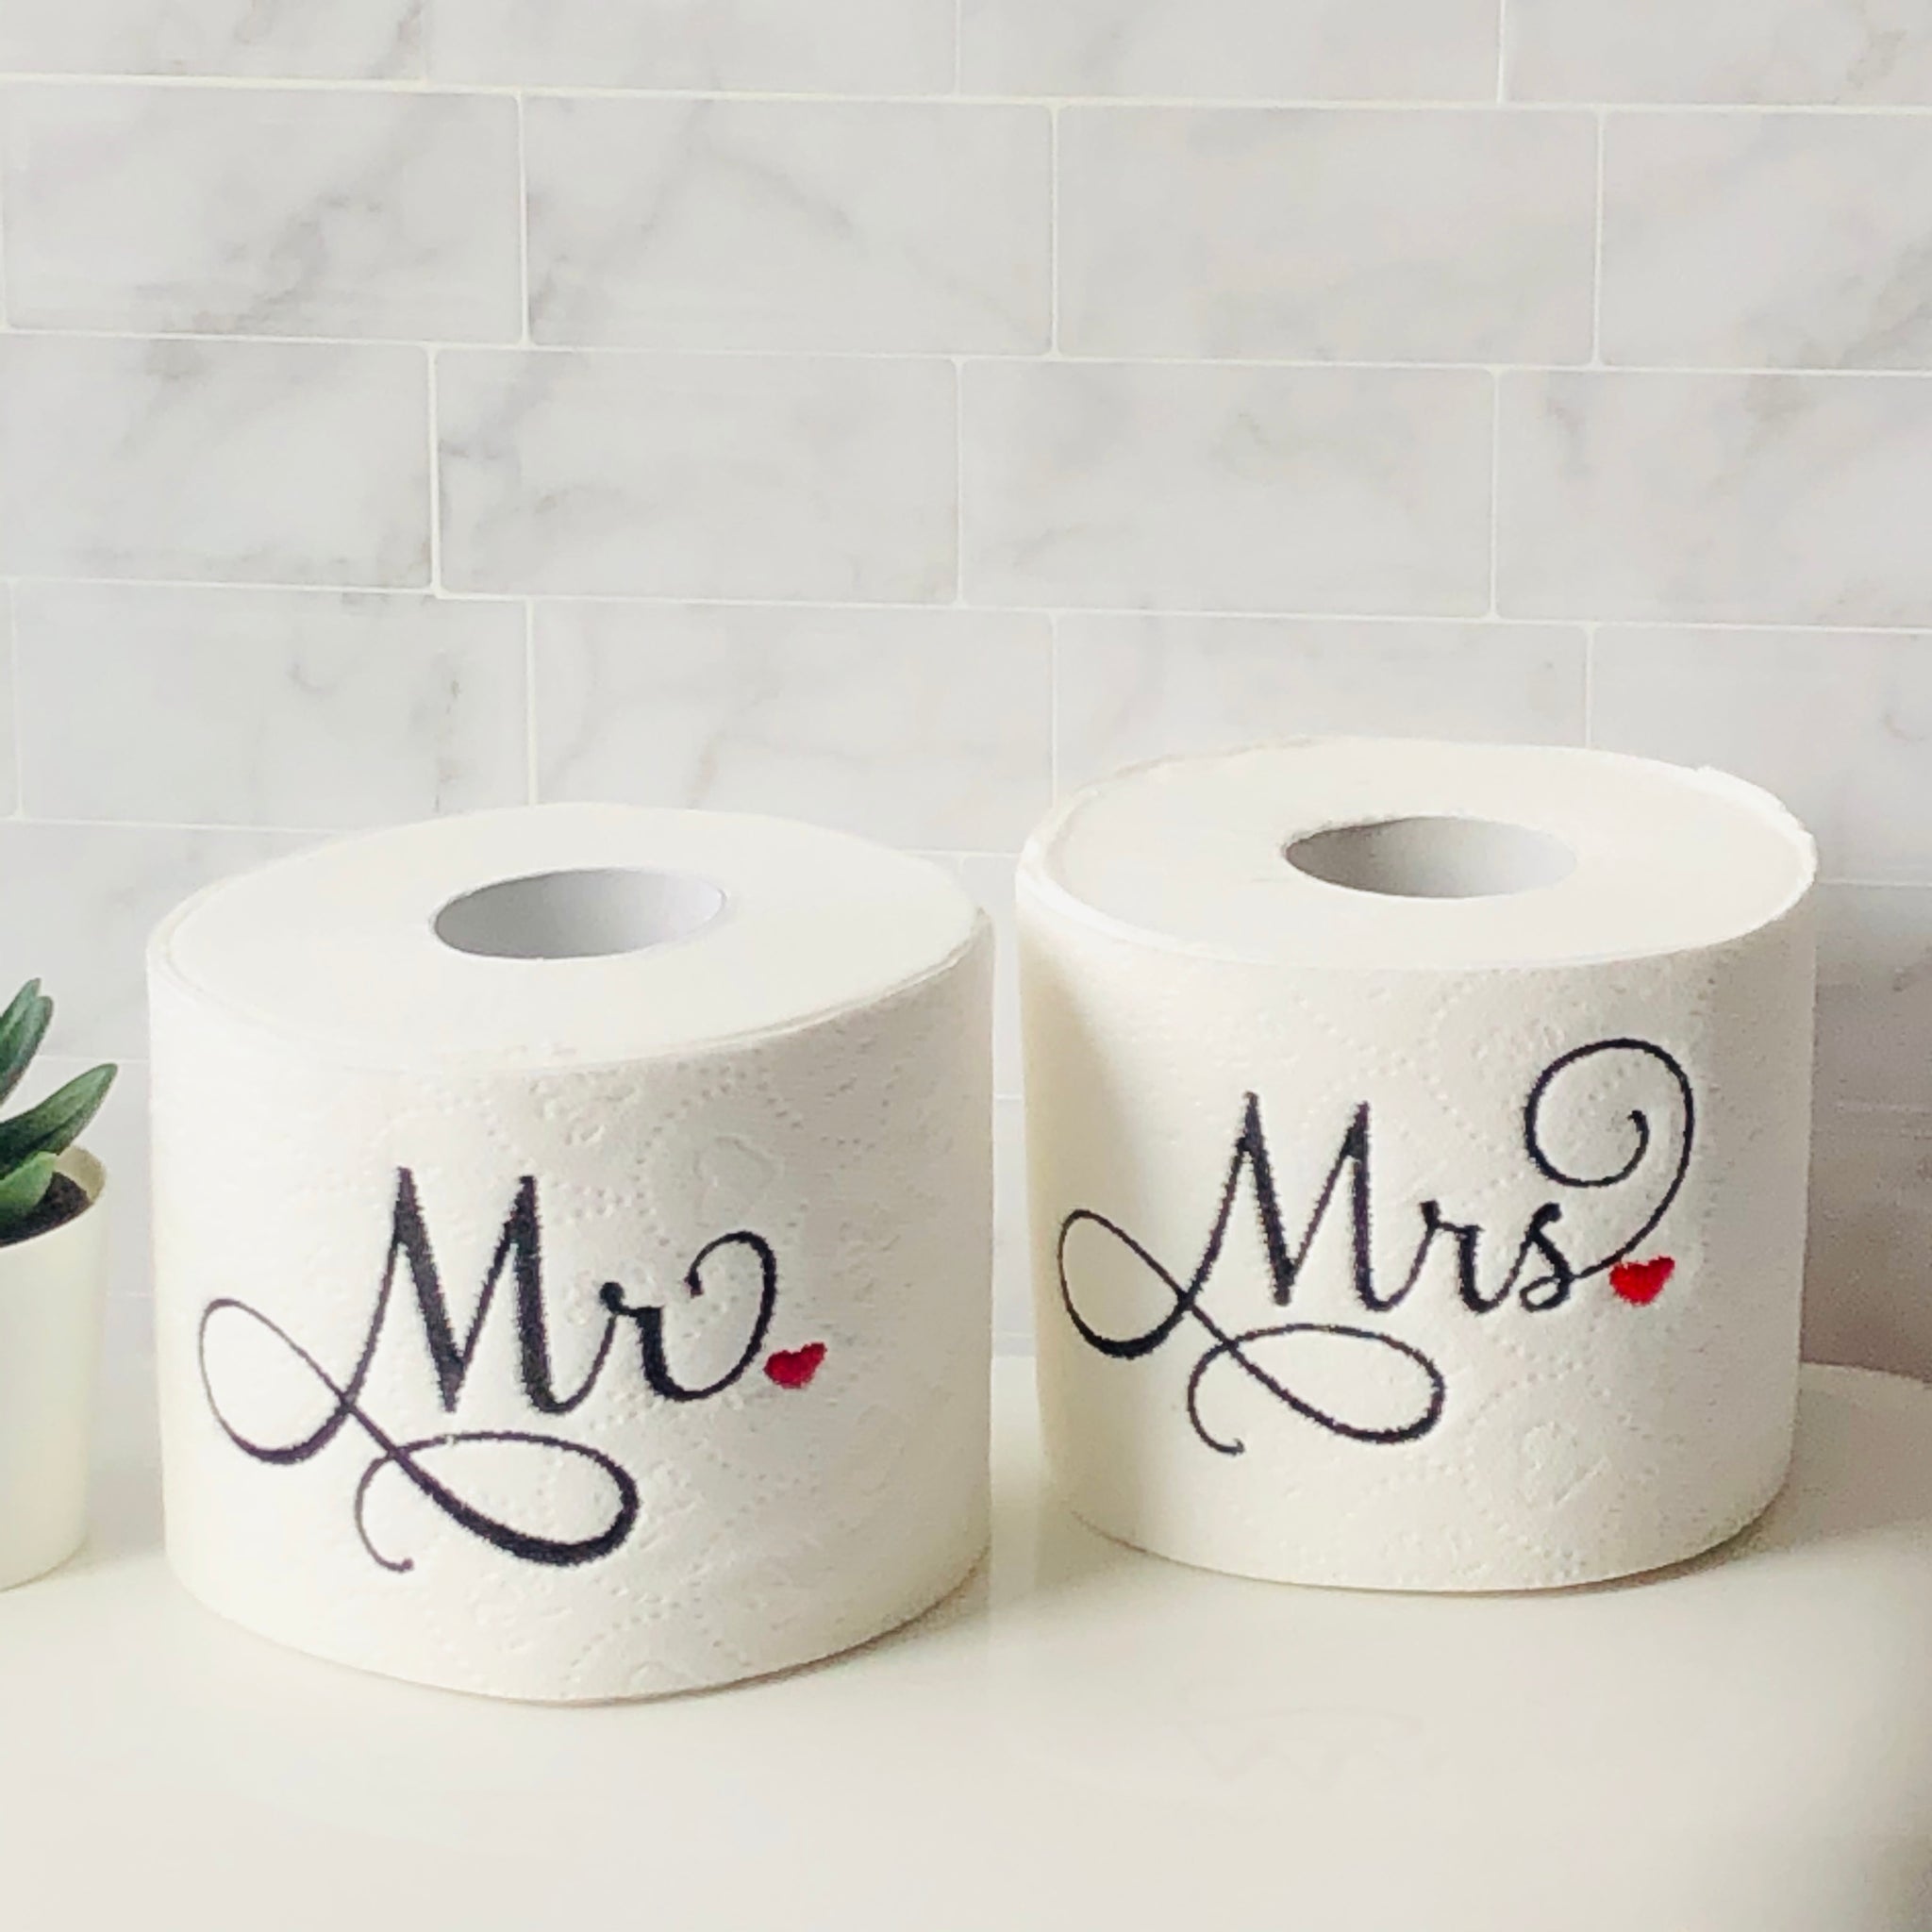 New Parents Funny Toilet Paper Gift - The Writing's on the Roll